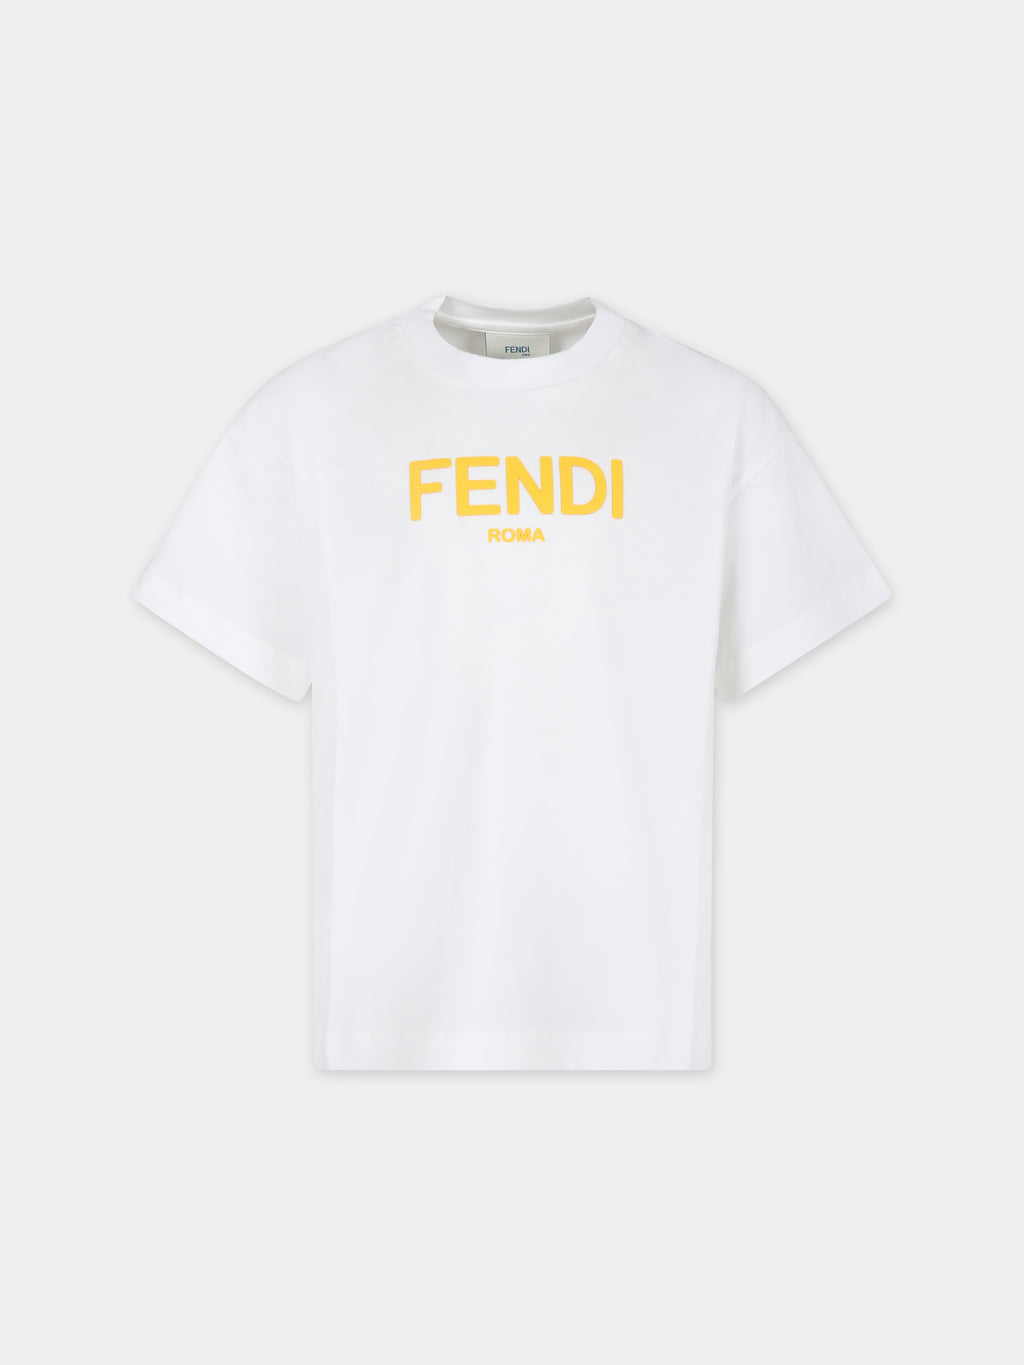 White T-shirt for kids with yellow logo